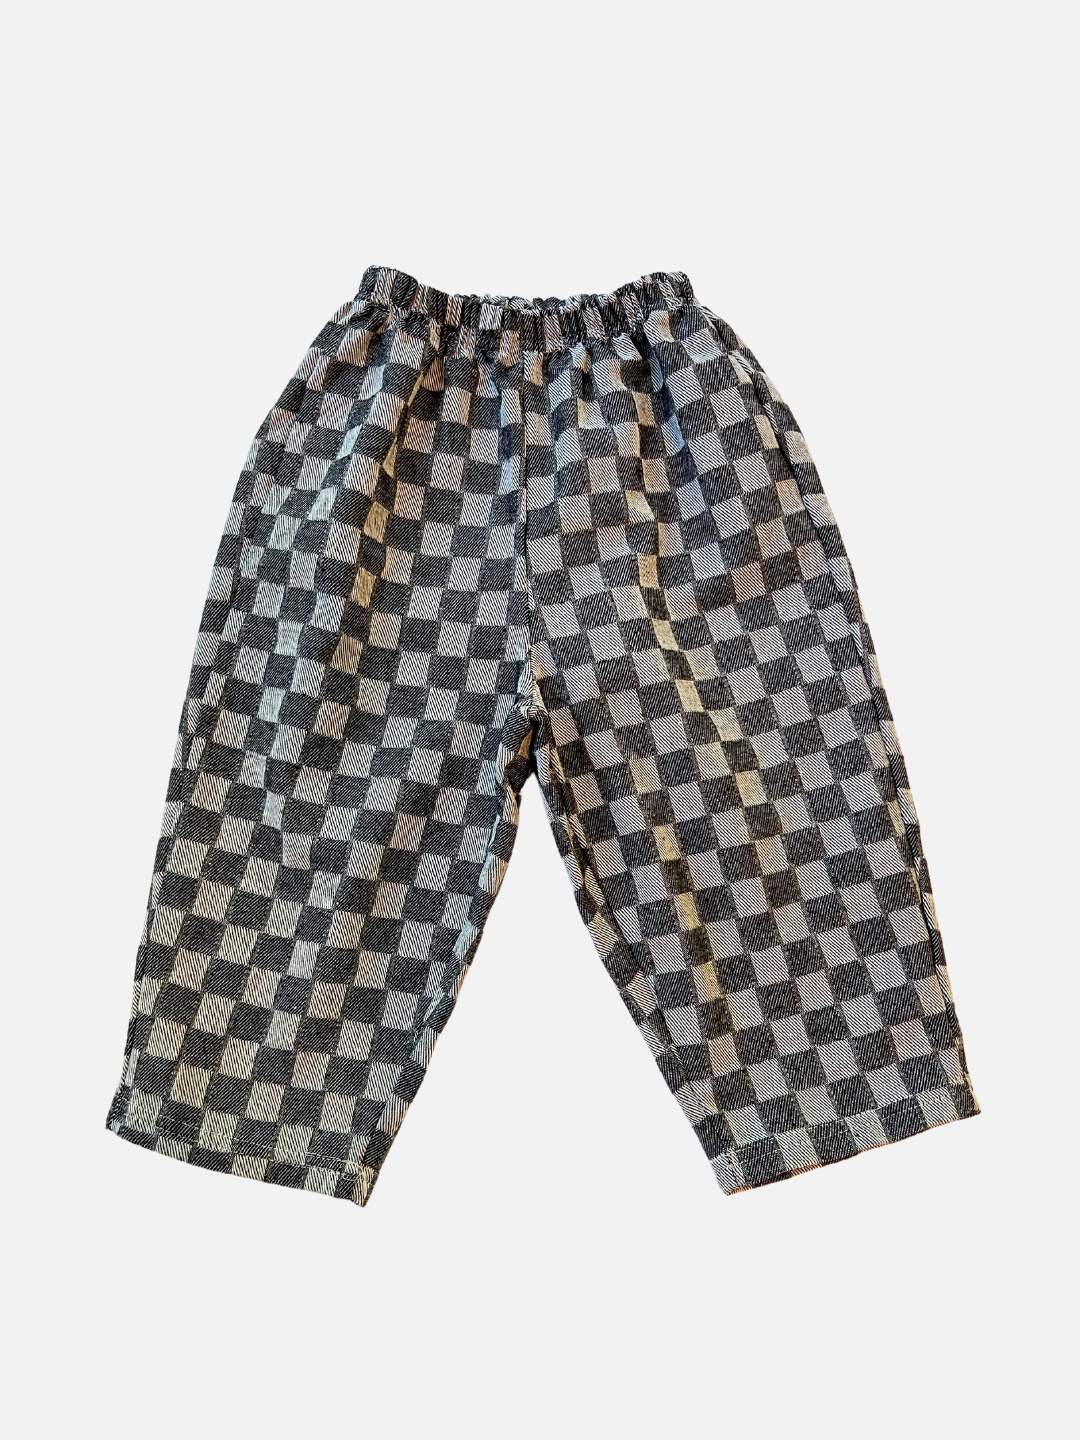 Charcoal Chess Club Pants Front Views